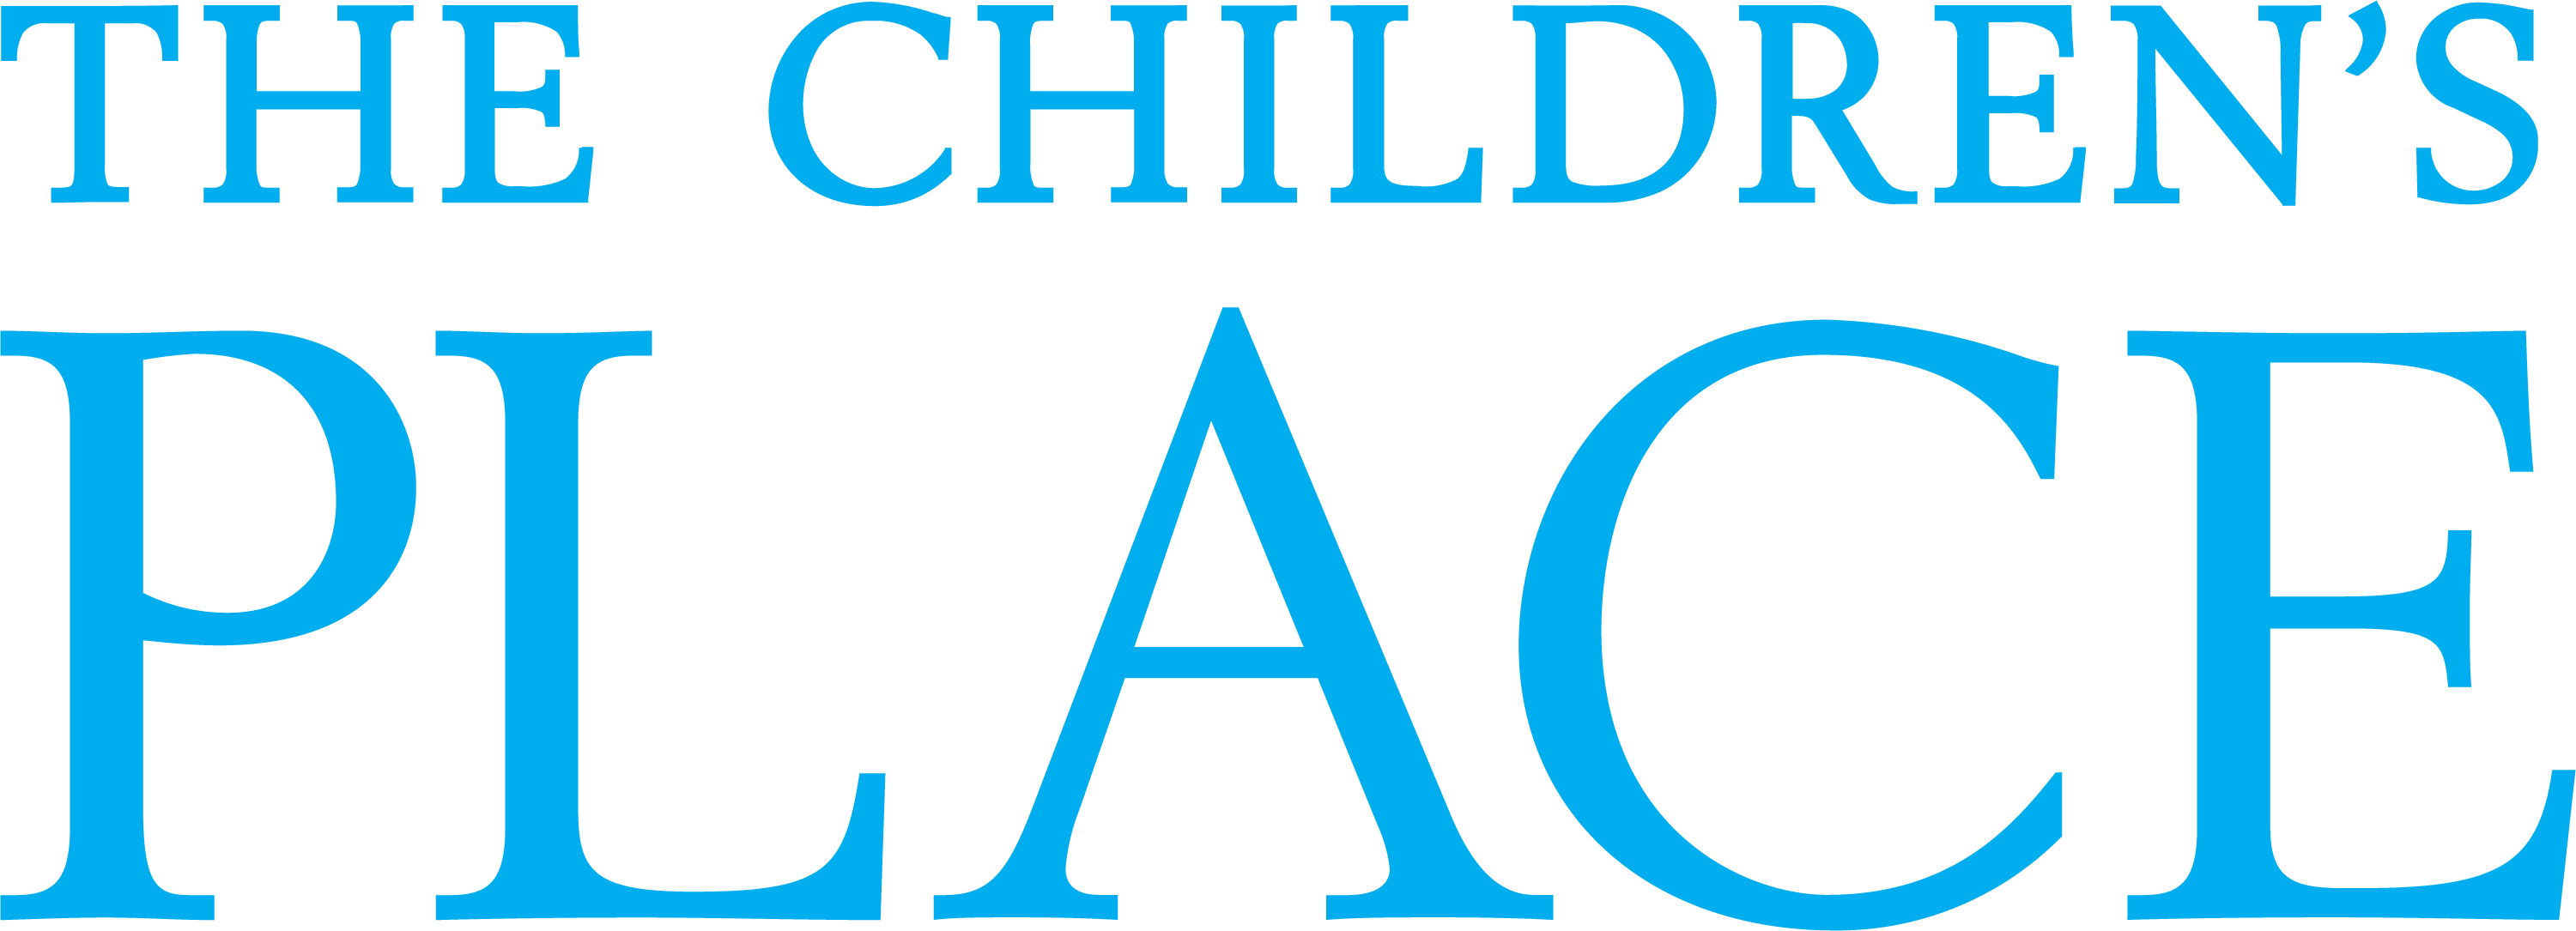 The Childrens Place Logo png